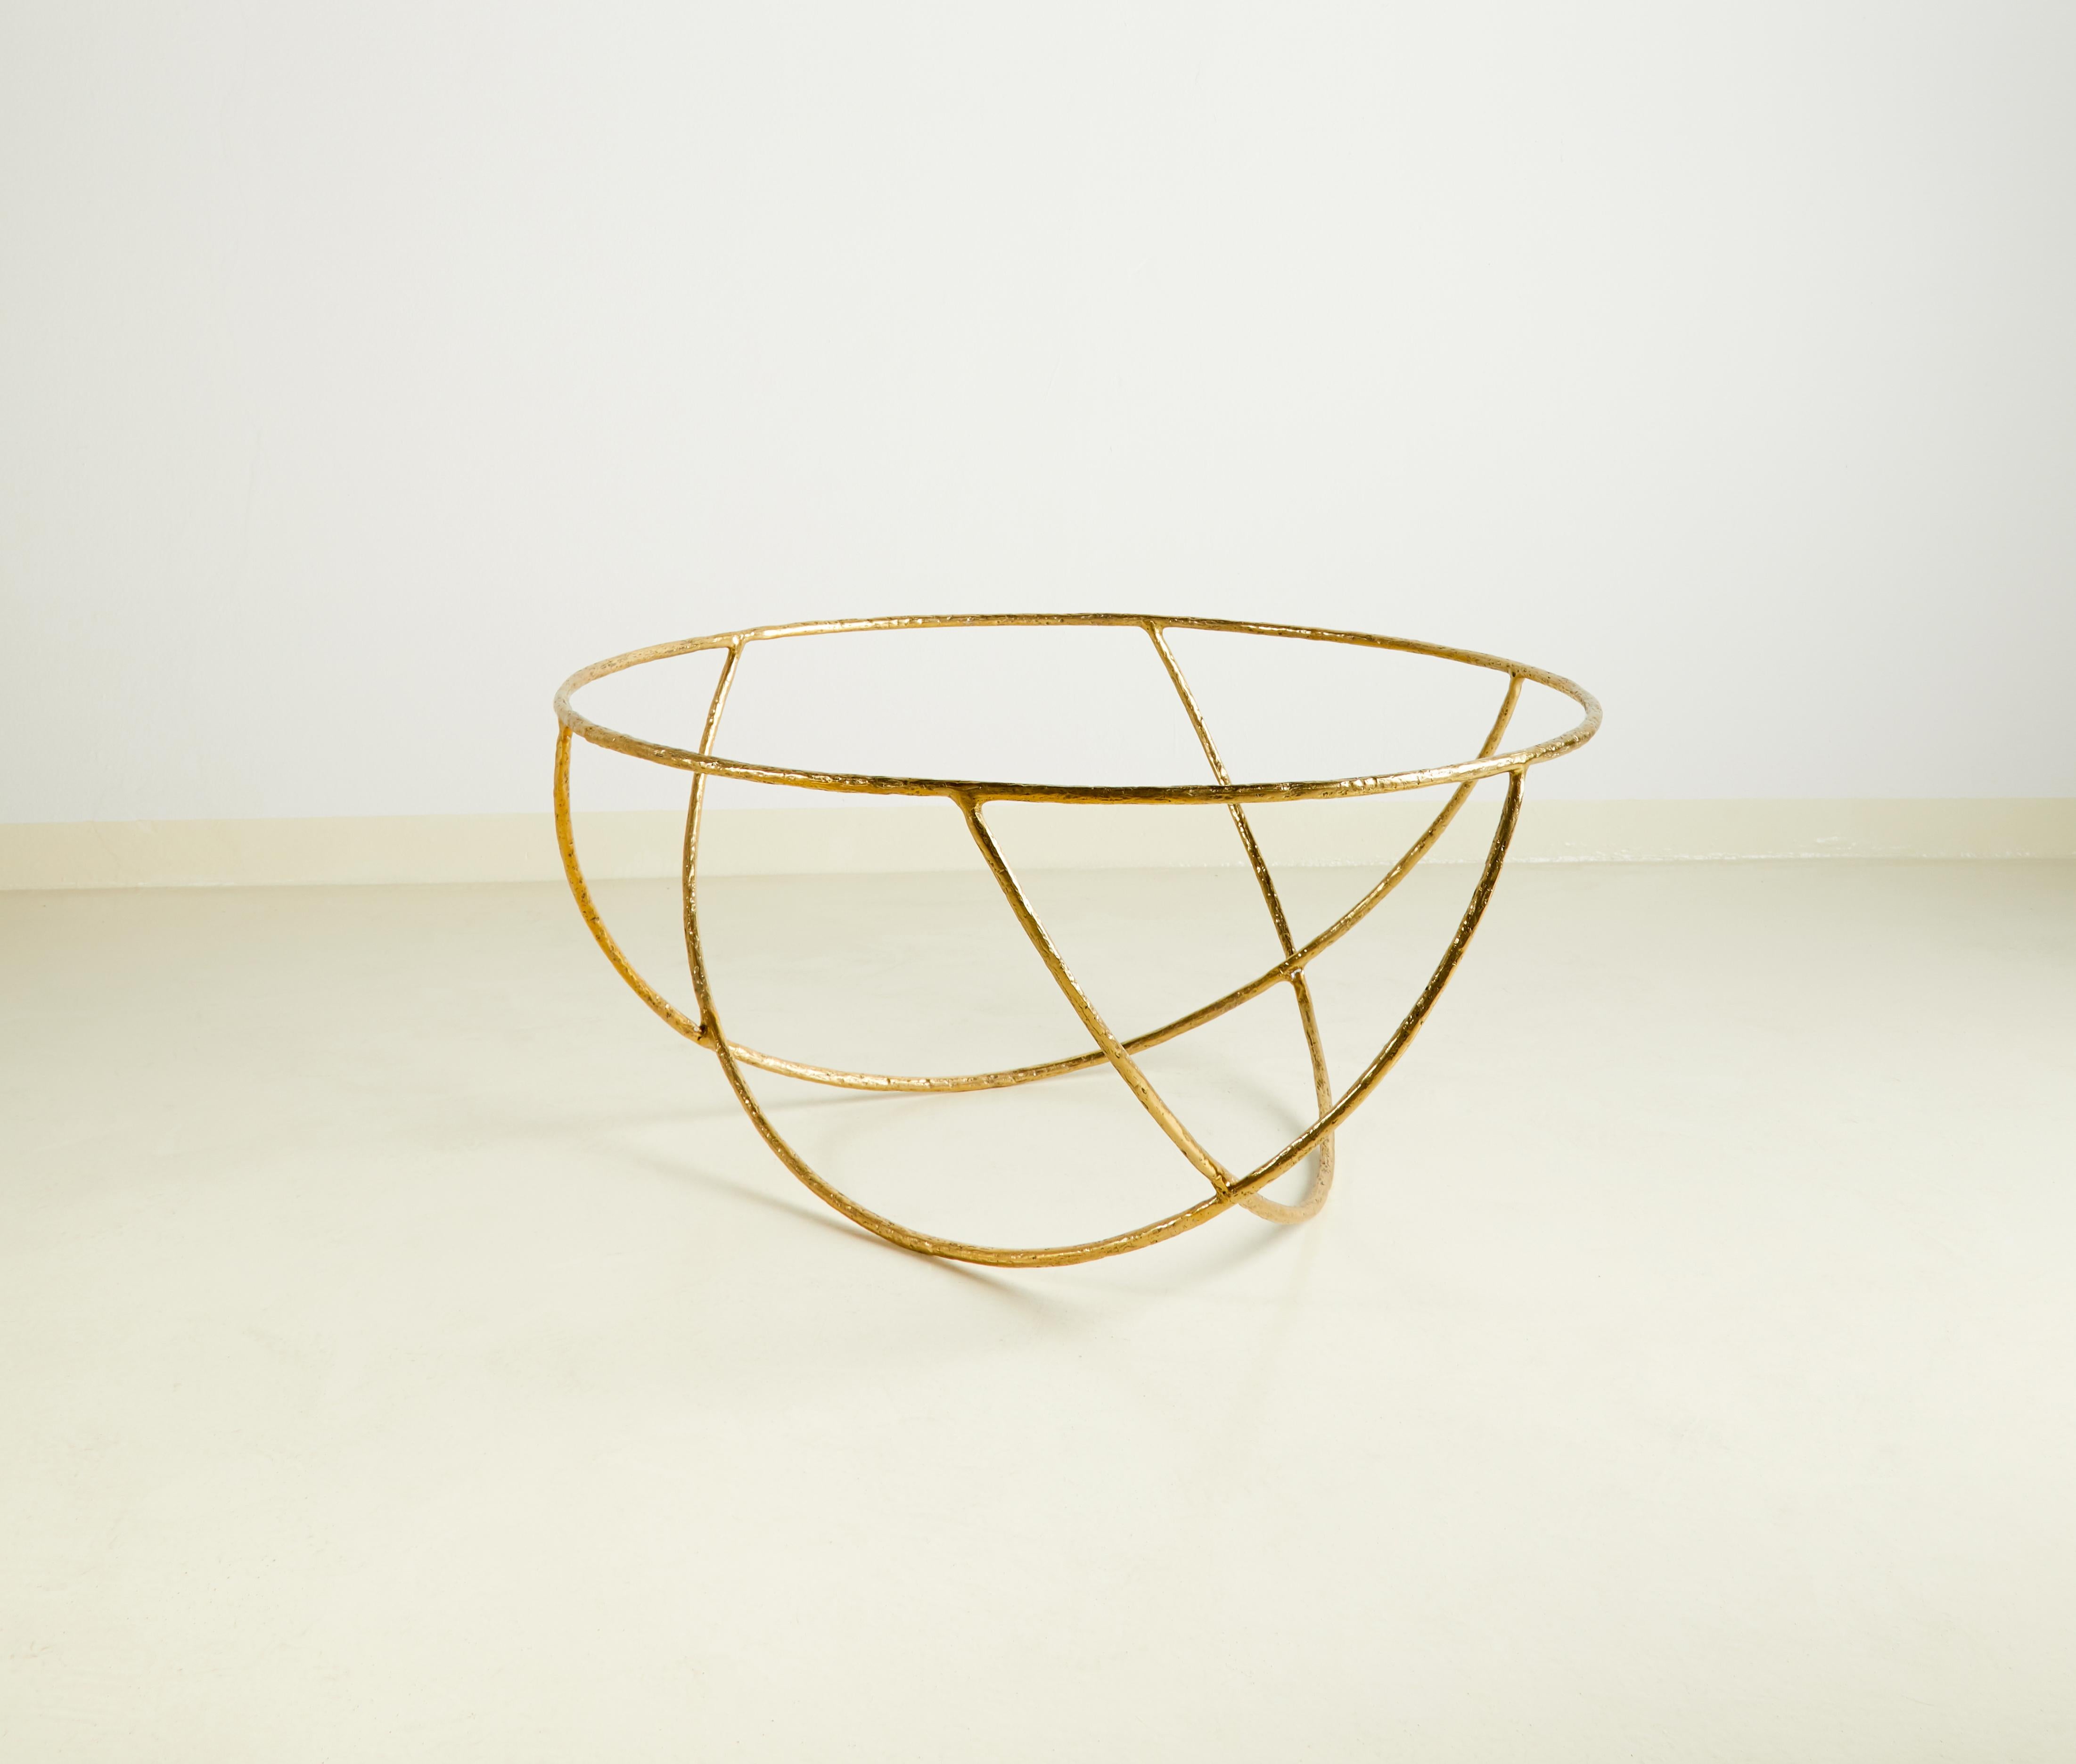 Brass sculpted console table, gold basket, Misaya
Dimensions: W 92 x L 92 x H 43 cm
Hand-sculpted brass table.
Sold without the glass top.